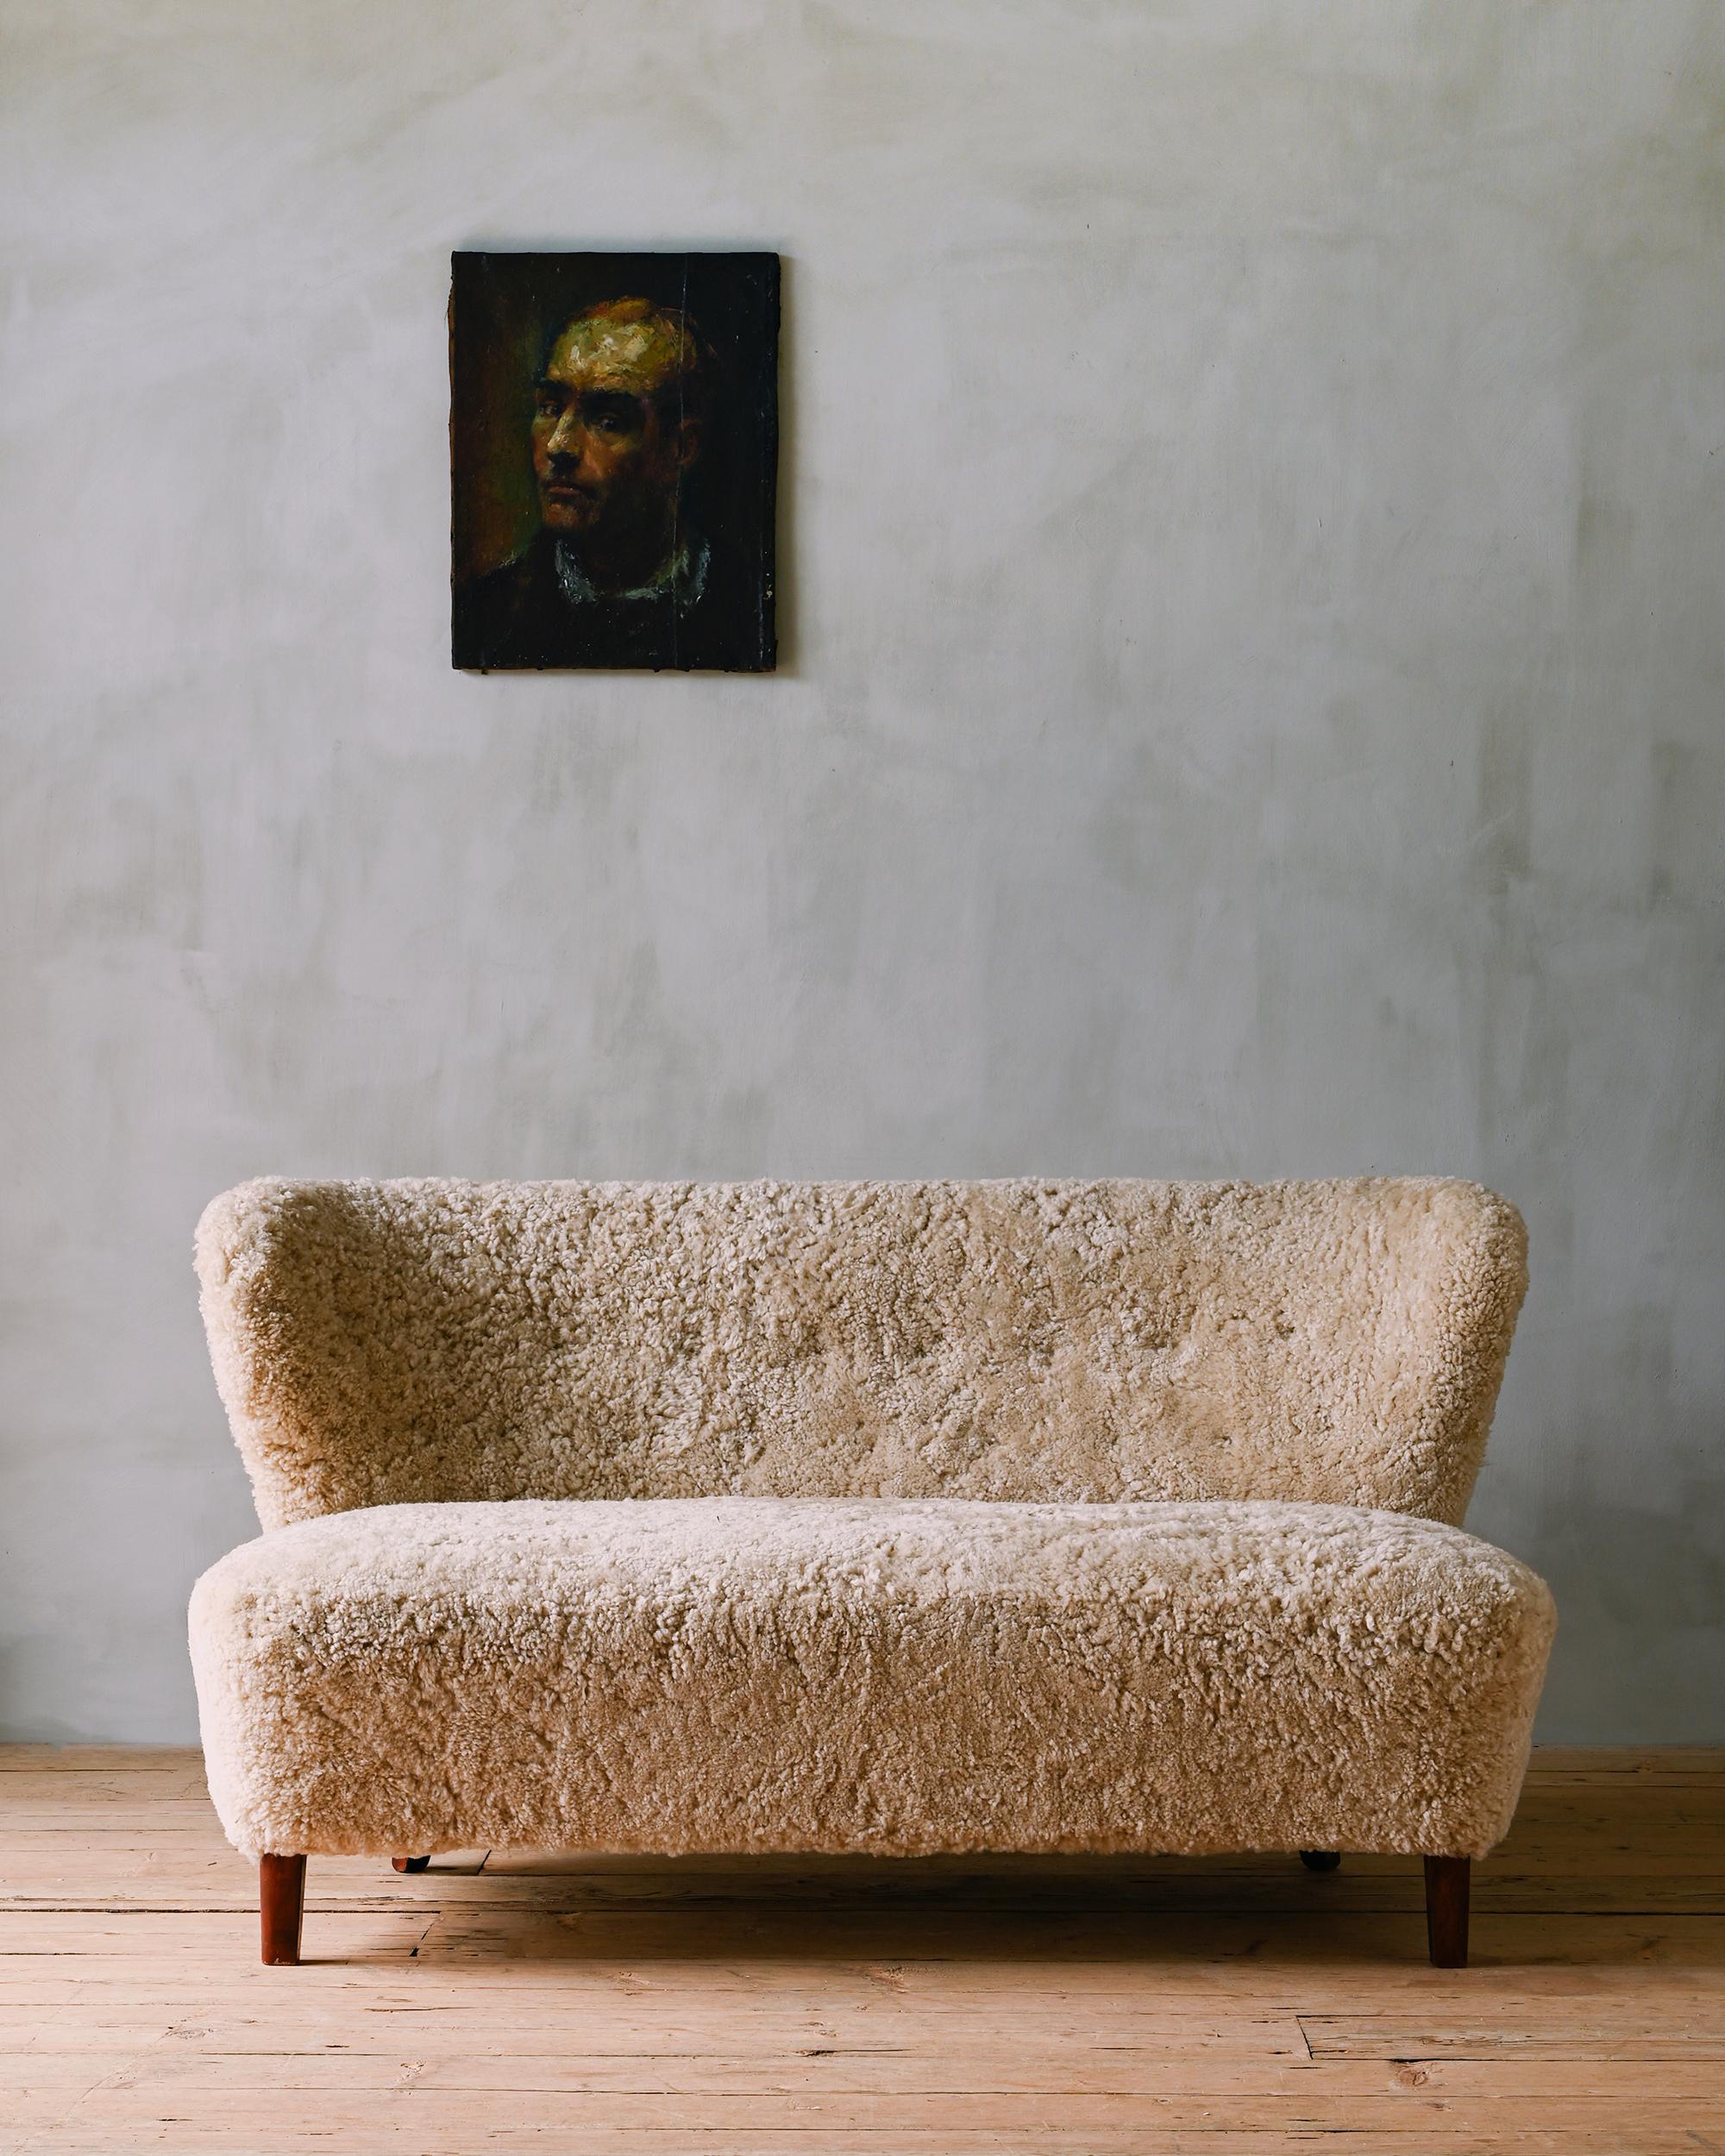 Fine sofa by Swedish designer, Gösta Jonsson, upholstered in sheepskin. ca 1940 produced in Jönköping, Sweden.

Gösta Jonsson (1902-1958) was a Swedish furniture designer and architect. He was born in Skåne, Sweden, and studied architecture at the